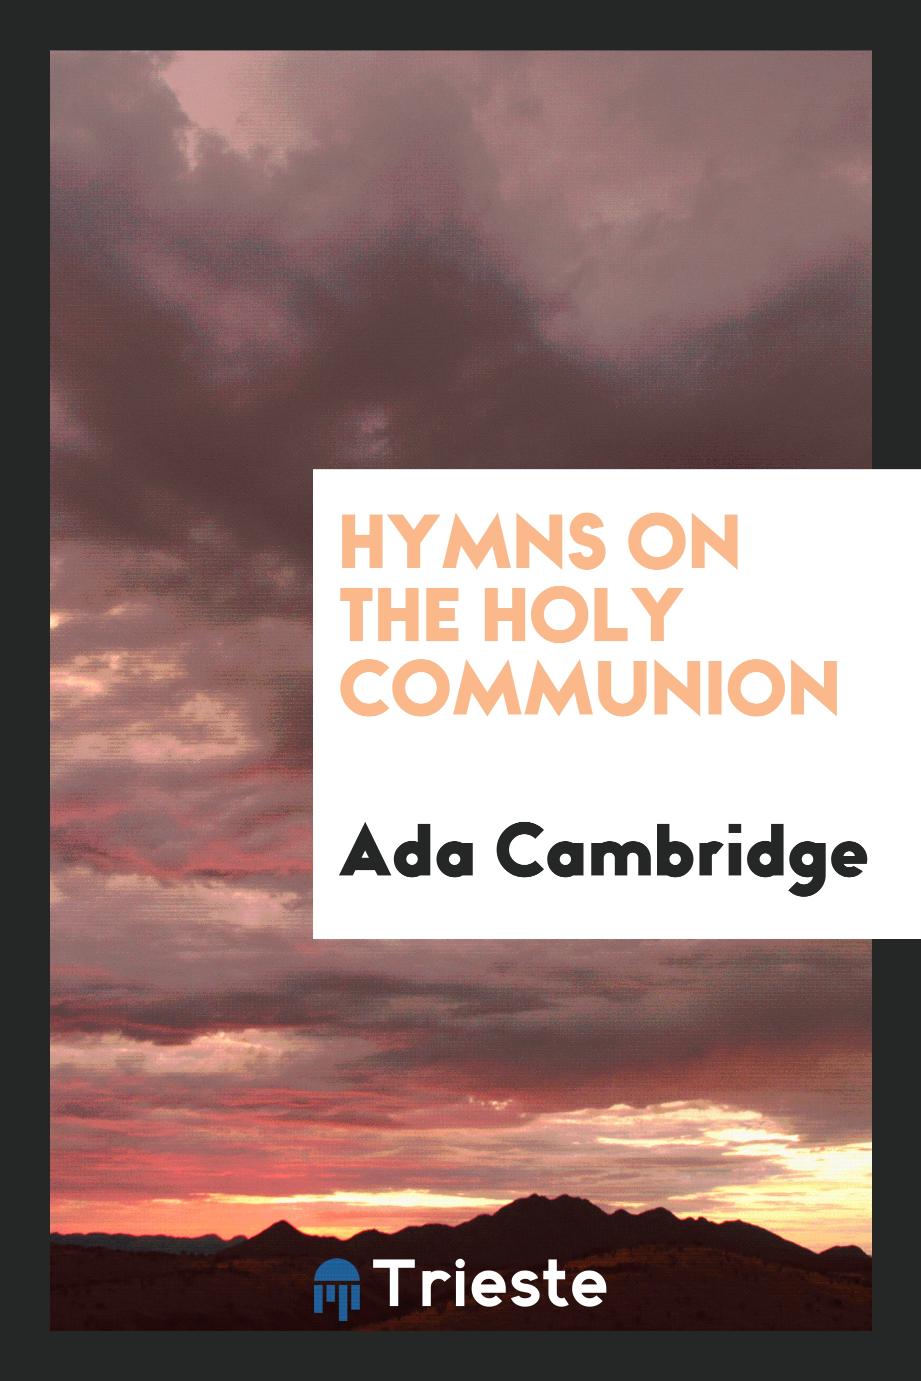 Hymns on the Holy Communion